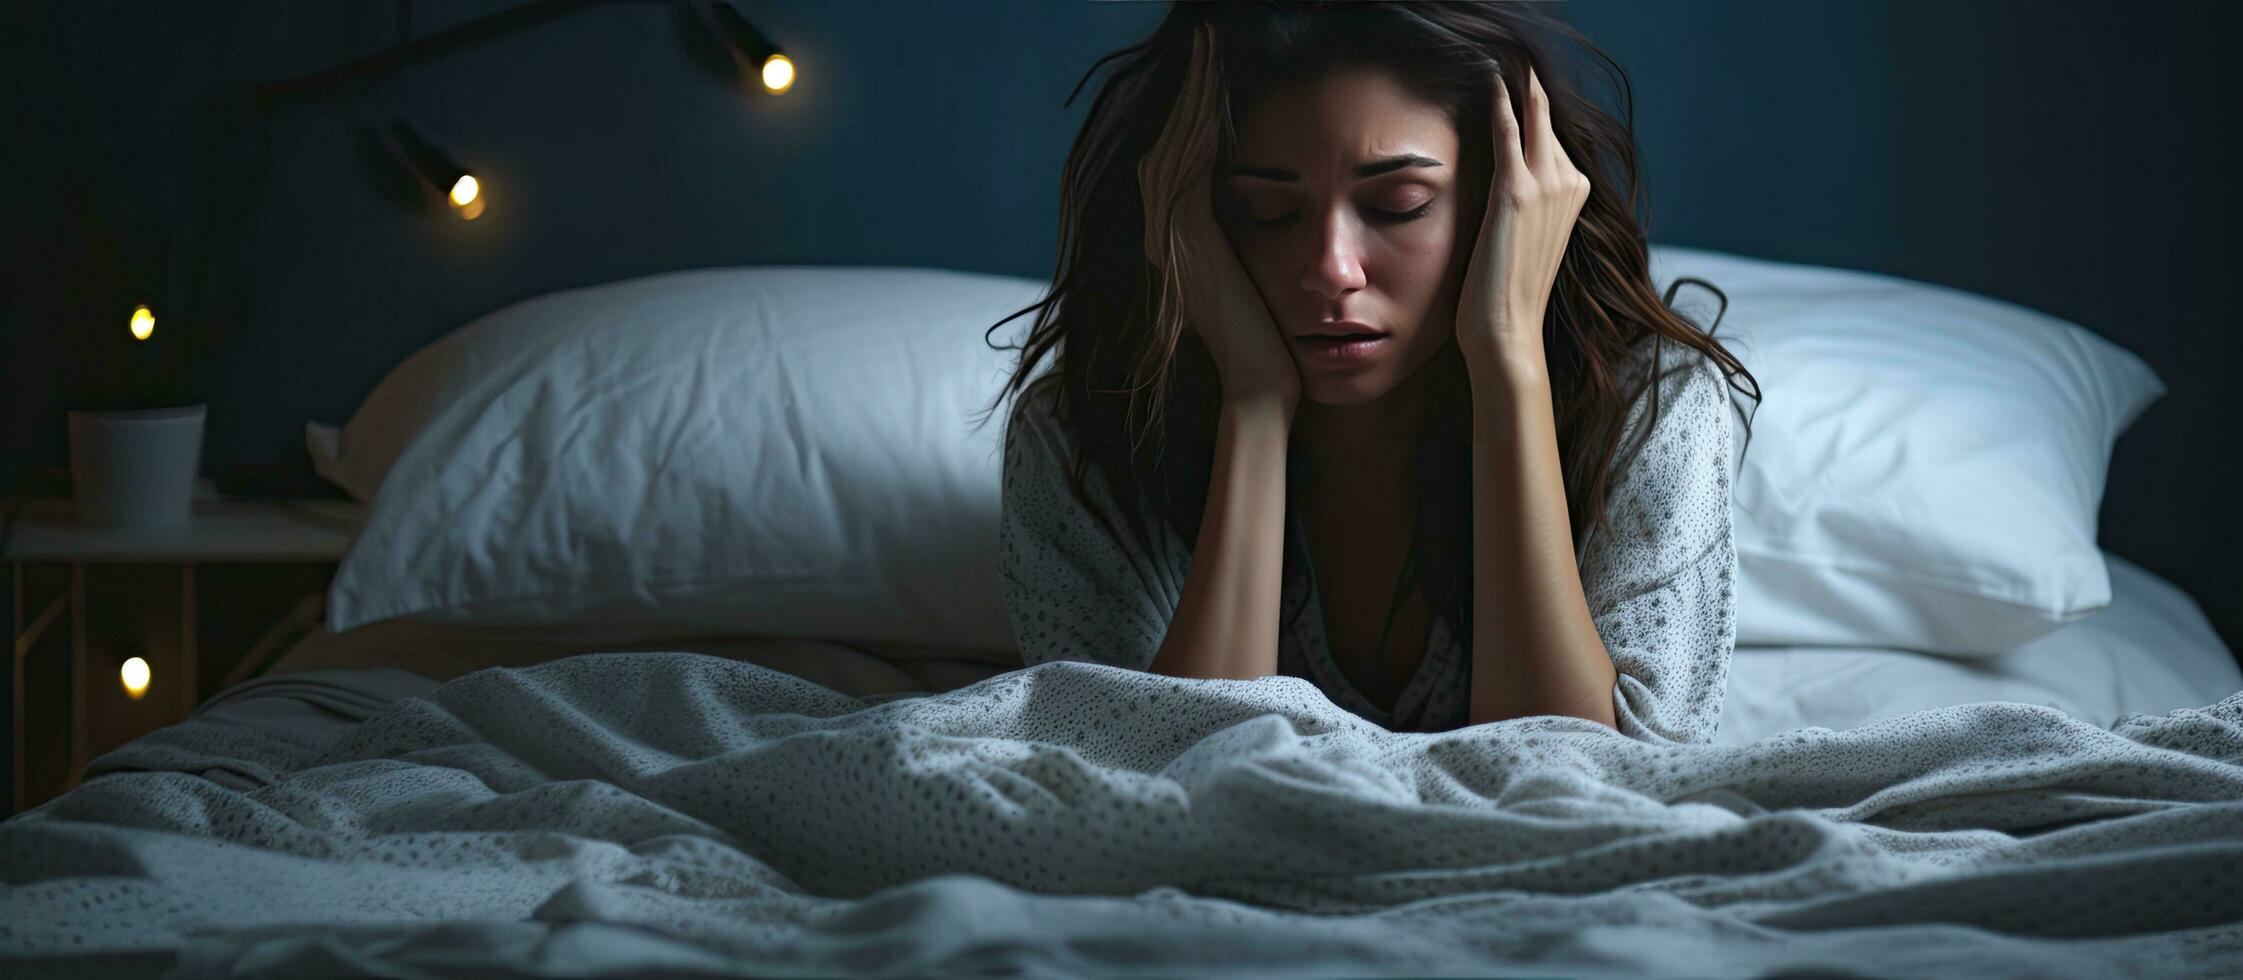 Unhappy woman experiences sleeplessness migraines and mental health issues at home photo